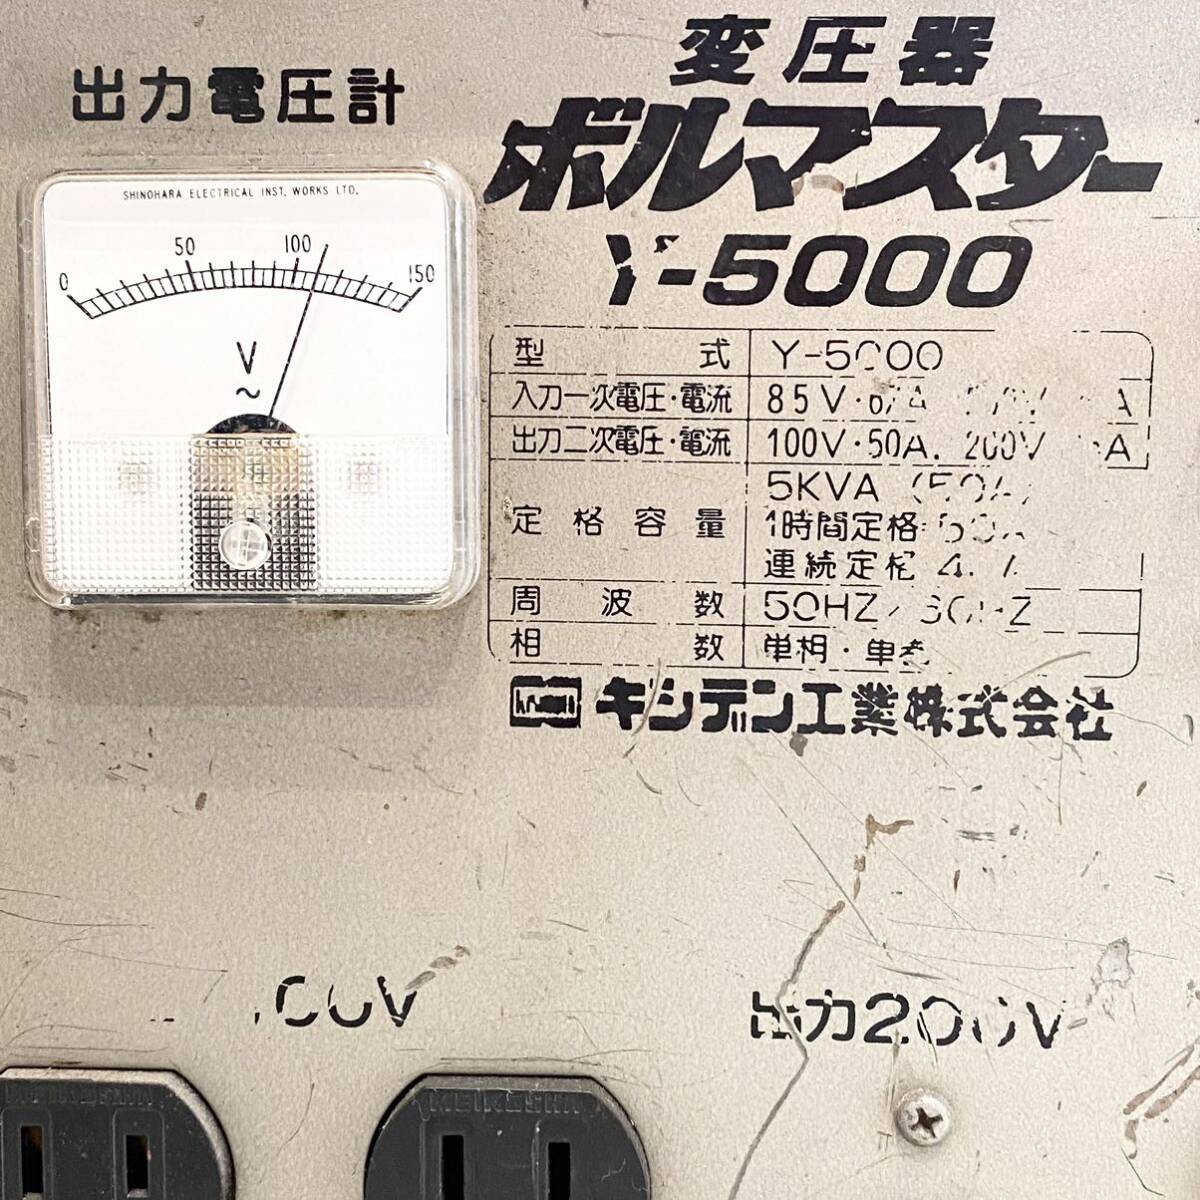  operation verification ending going up and down pressure combined use 5KVA spread type transformer boru master Y-5000 KISHIDENkisiten industry single phase 100V single phase 200V pressure . pressure combined use cable less 